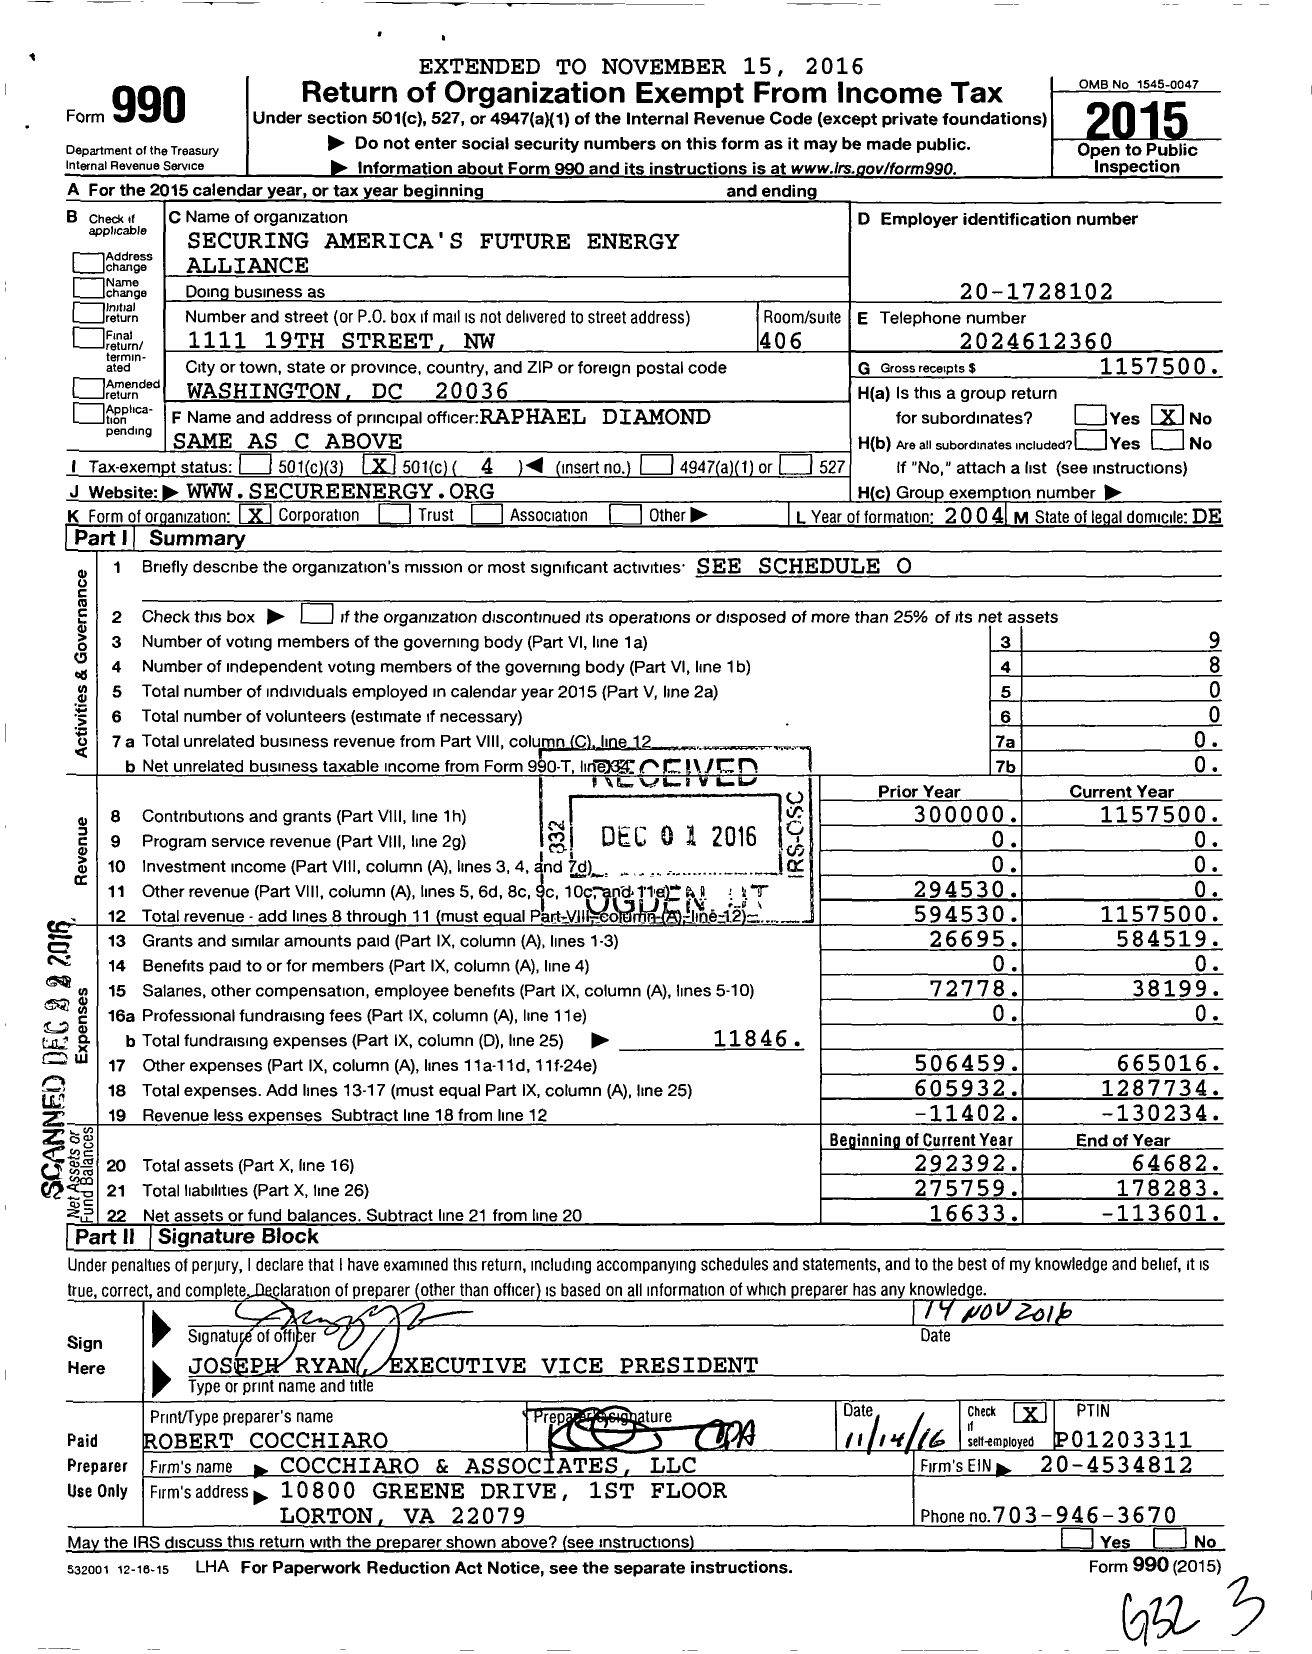 Image of first page of 2015 Form 990O for Securing Americas Future Energy (SAFE)